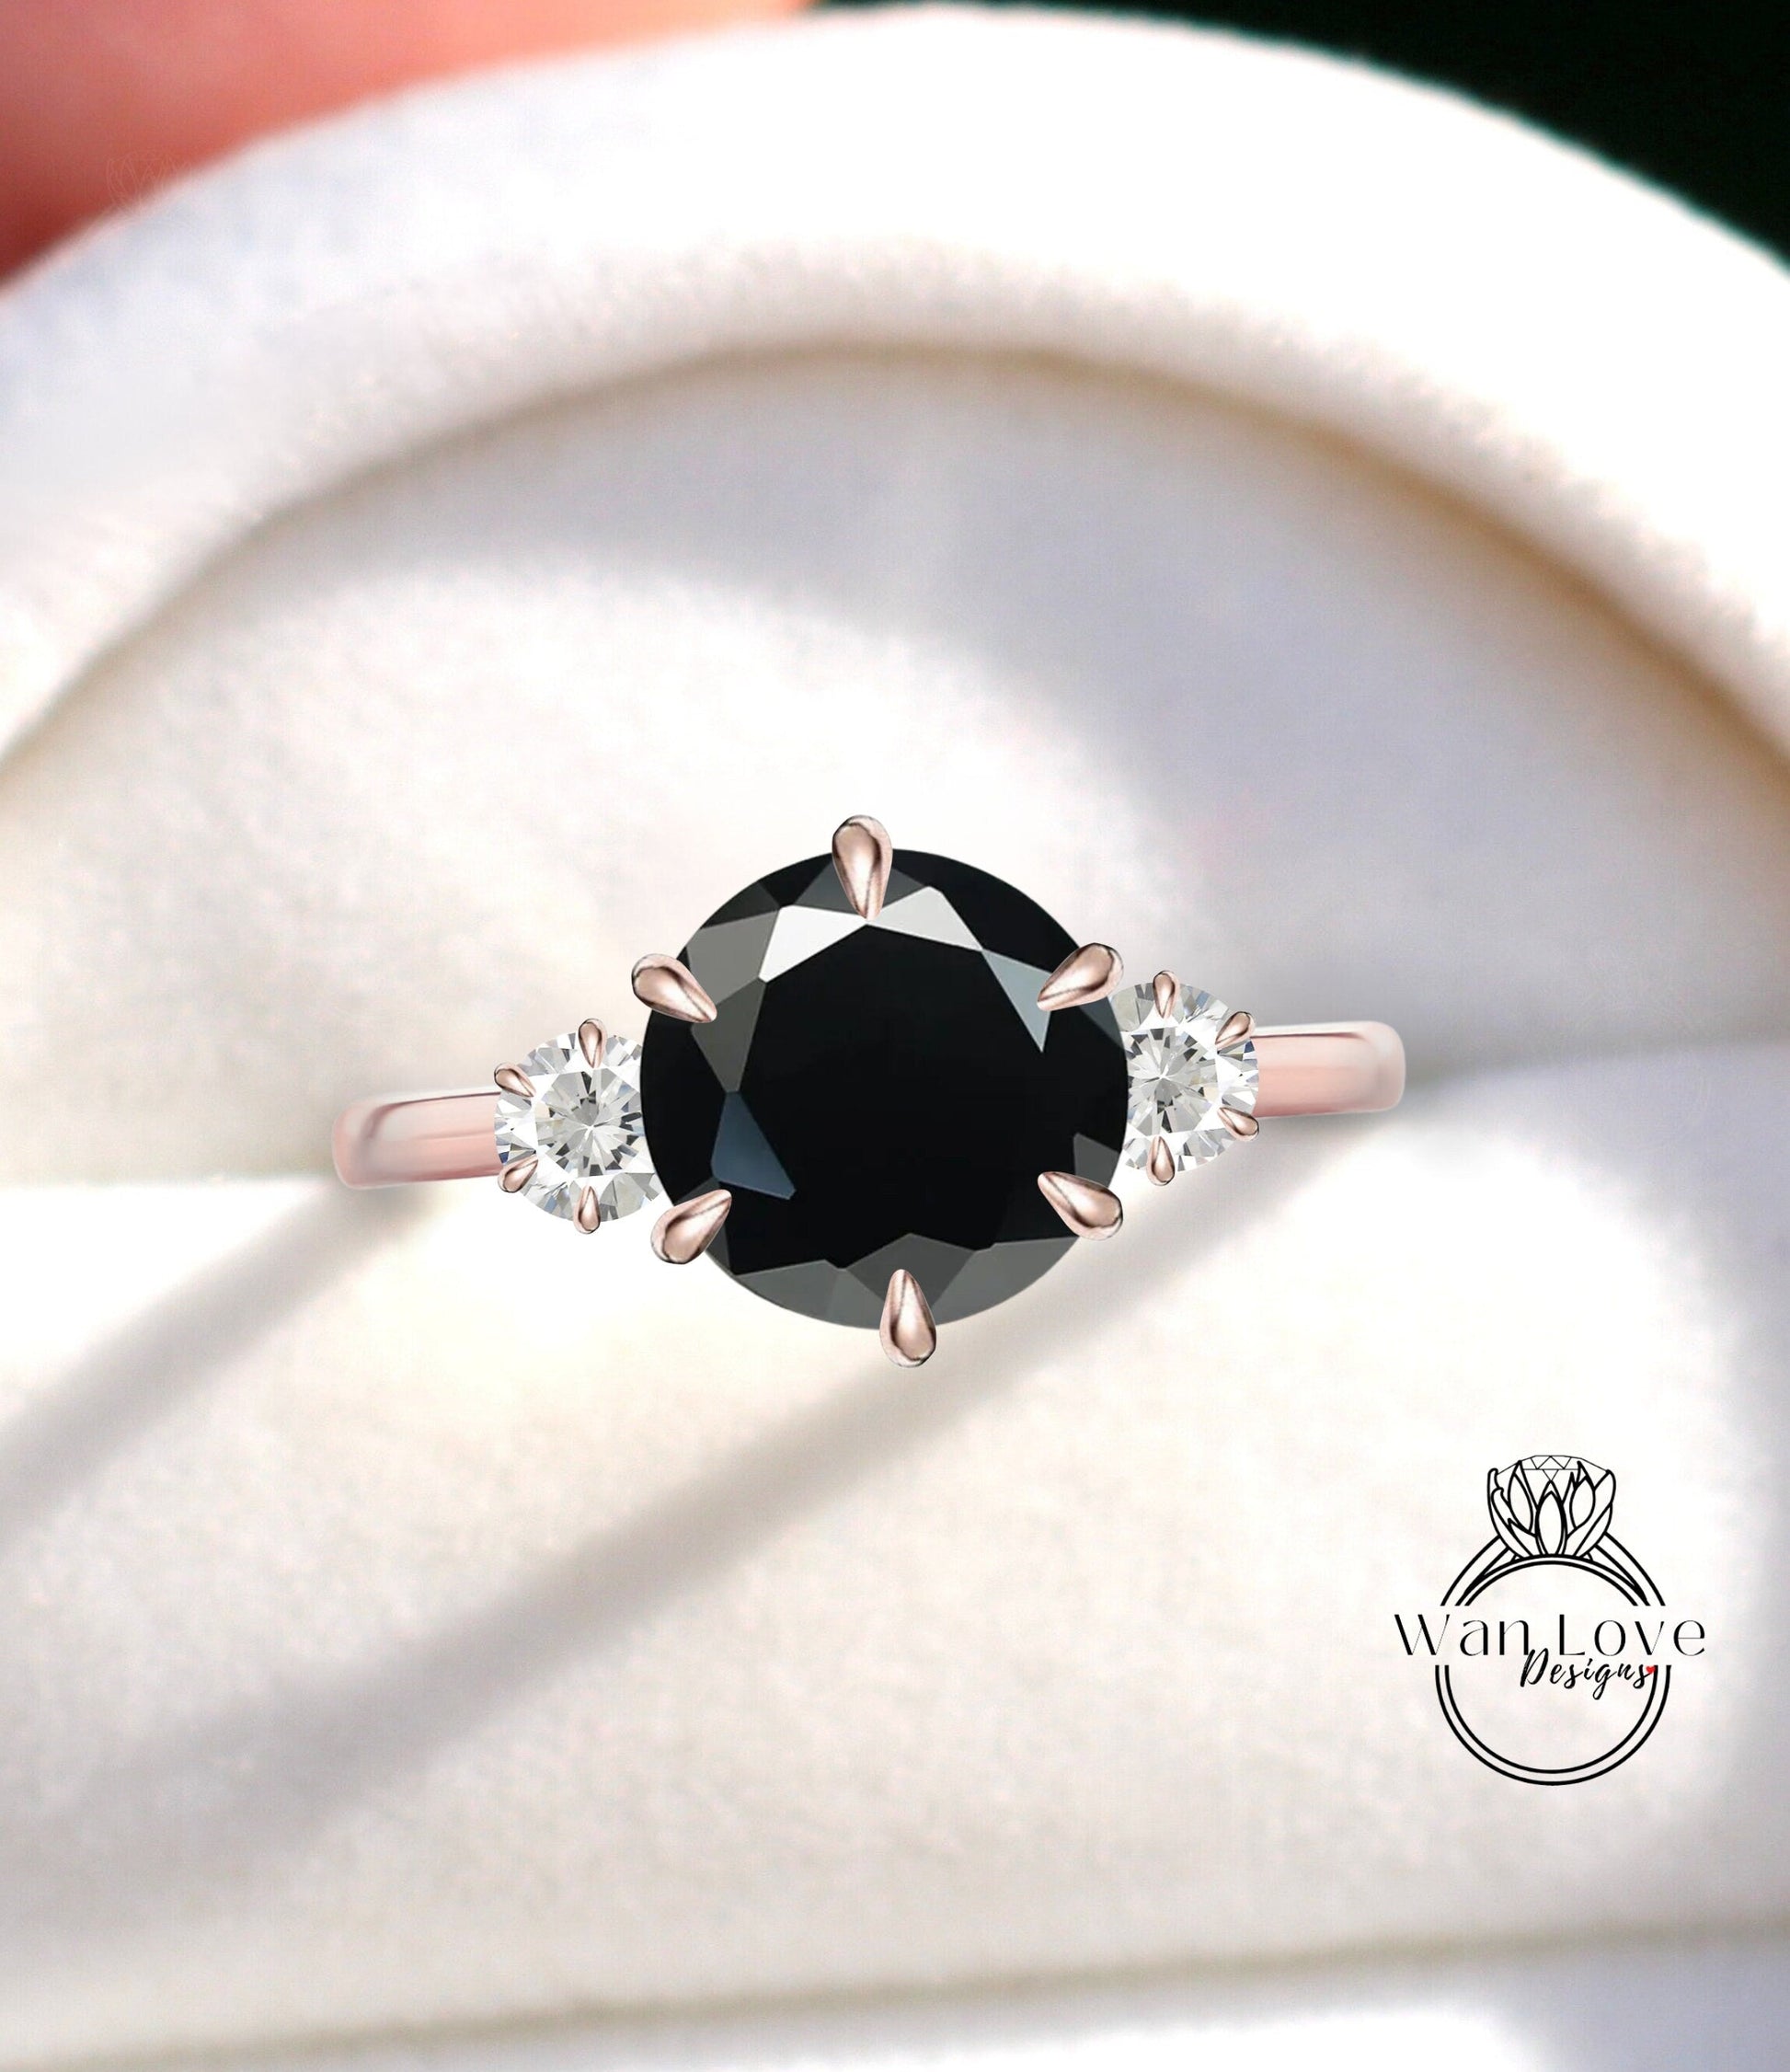 Vintage Black Spinel Engagement Ring round Cut White Spaphire Art Deco three gem stone cluster 6 Prong ring Wedding Bridal Ring Anniversary Wan Love Designs